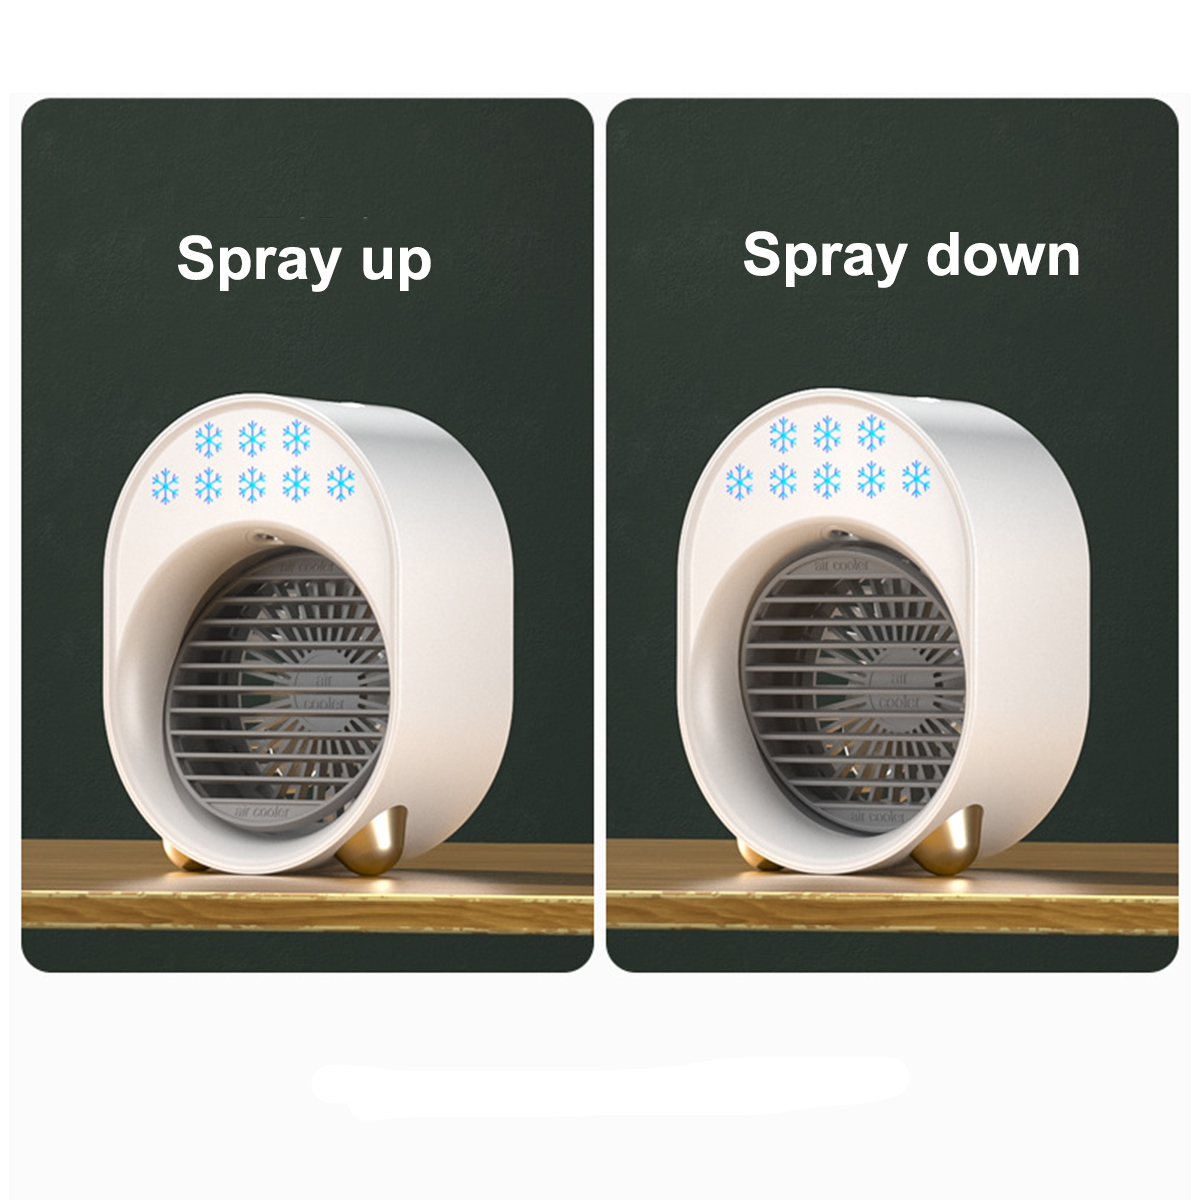 Bakeey-3-Gear-Mini-Water-Cooling-Fan-Spray-Humidification-Portable-Colorful-Night-Light-Air-Cooler-T-1838417-7